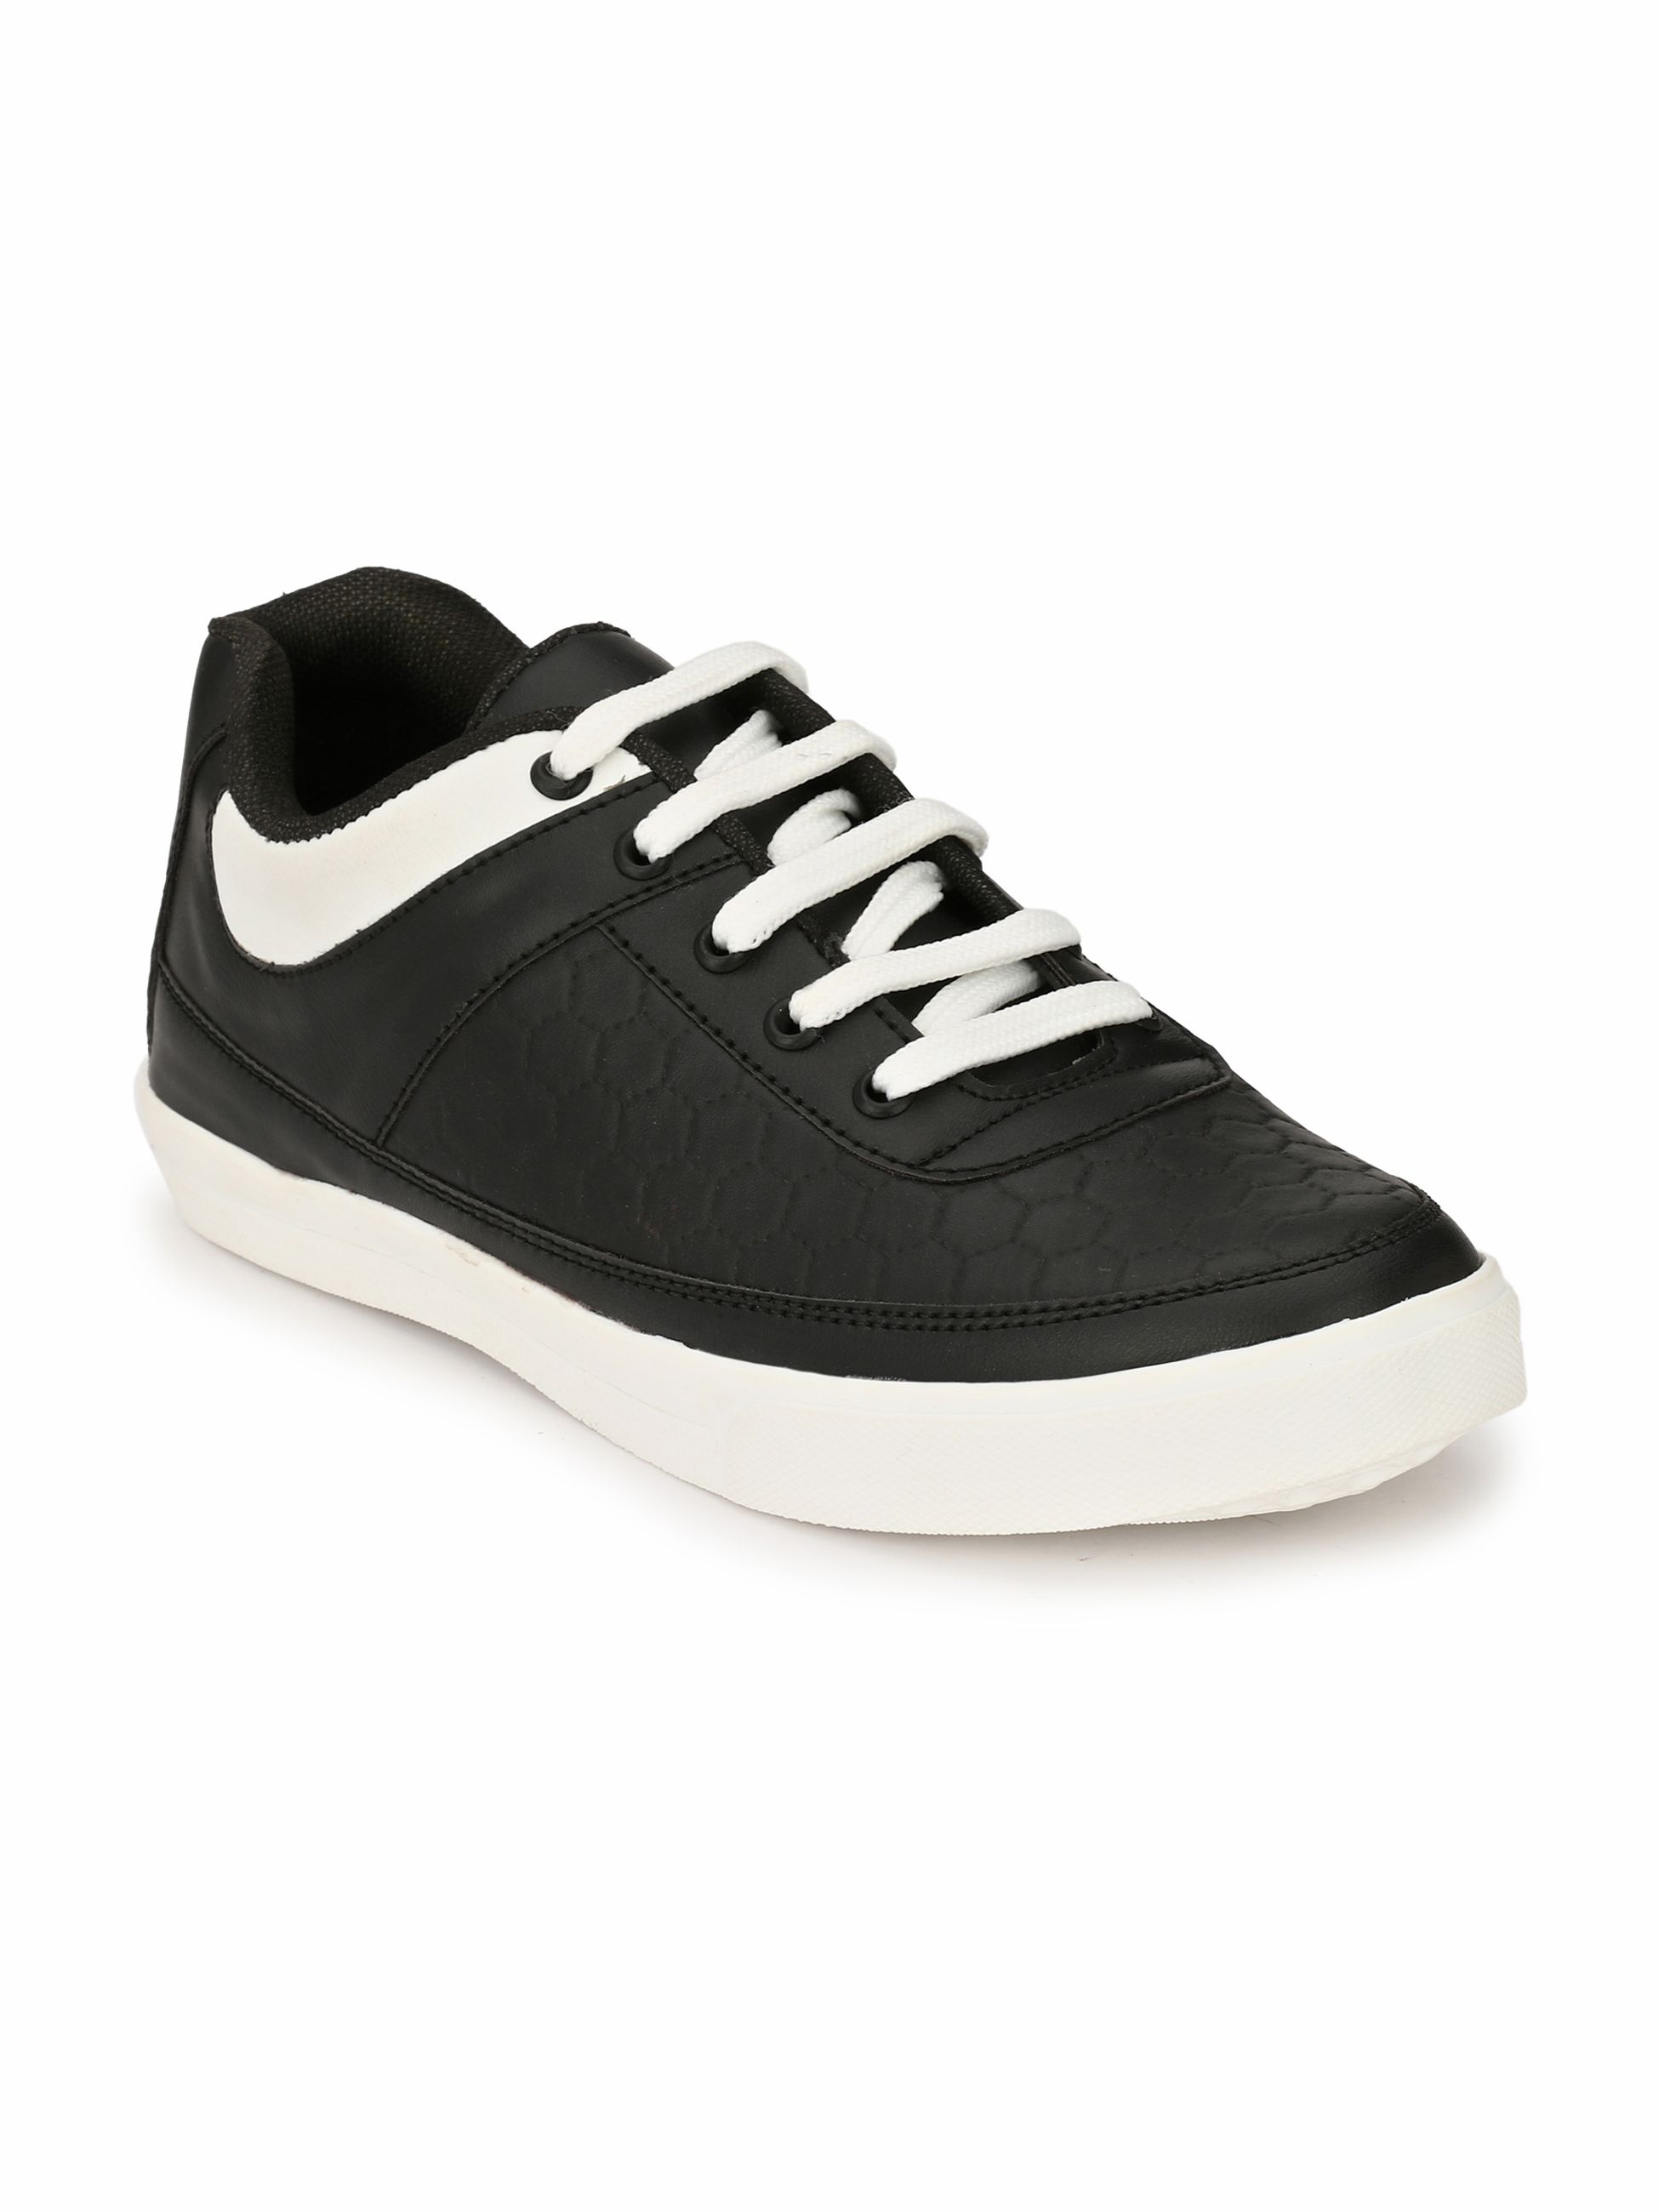 Buy Prolific Black Casual Shoes 